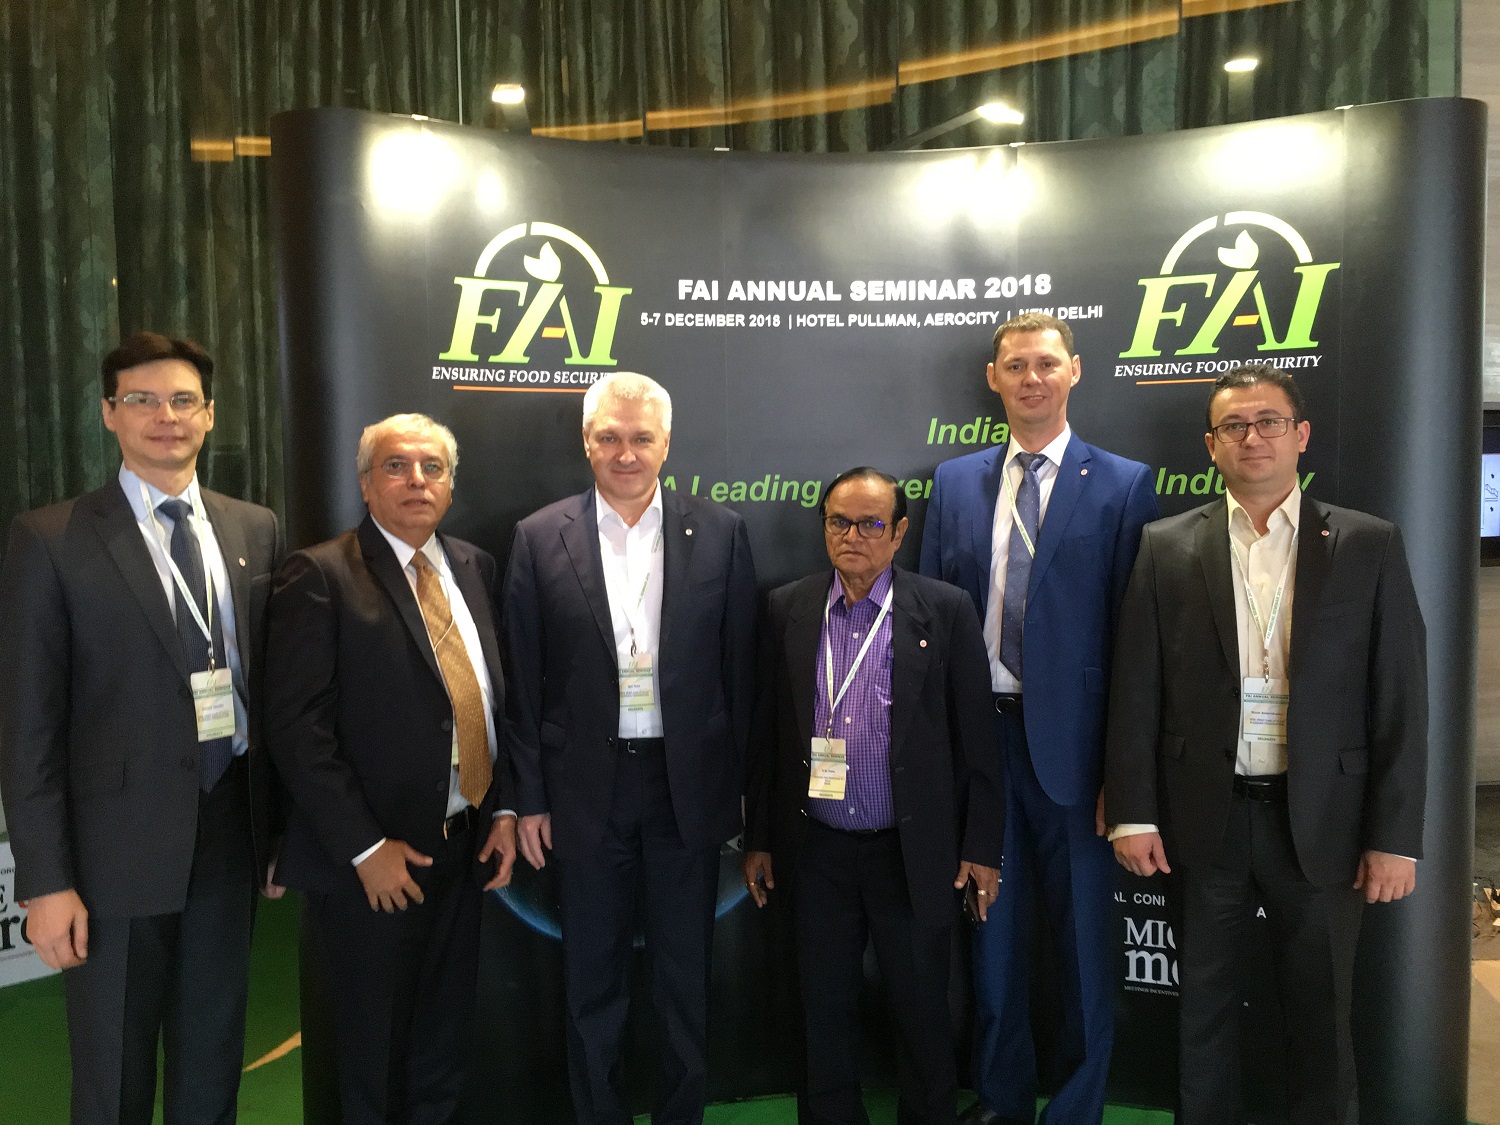 On December 5-7th, 2018, NIIK team headed by President and CEO Igor Esin attended FAI Annual Seminar 2018 held in New Delhi, India